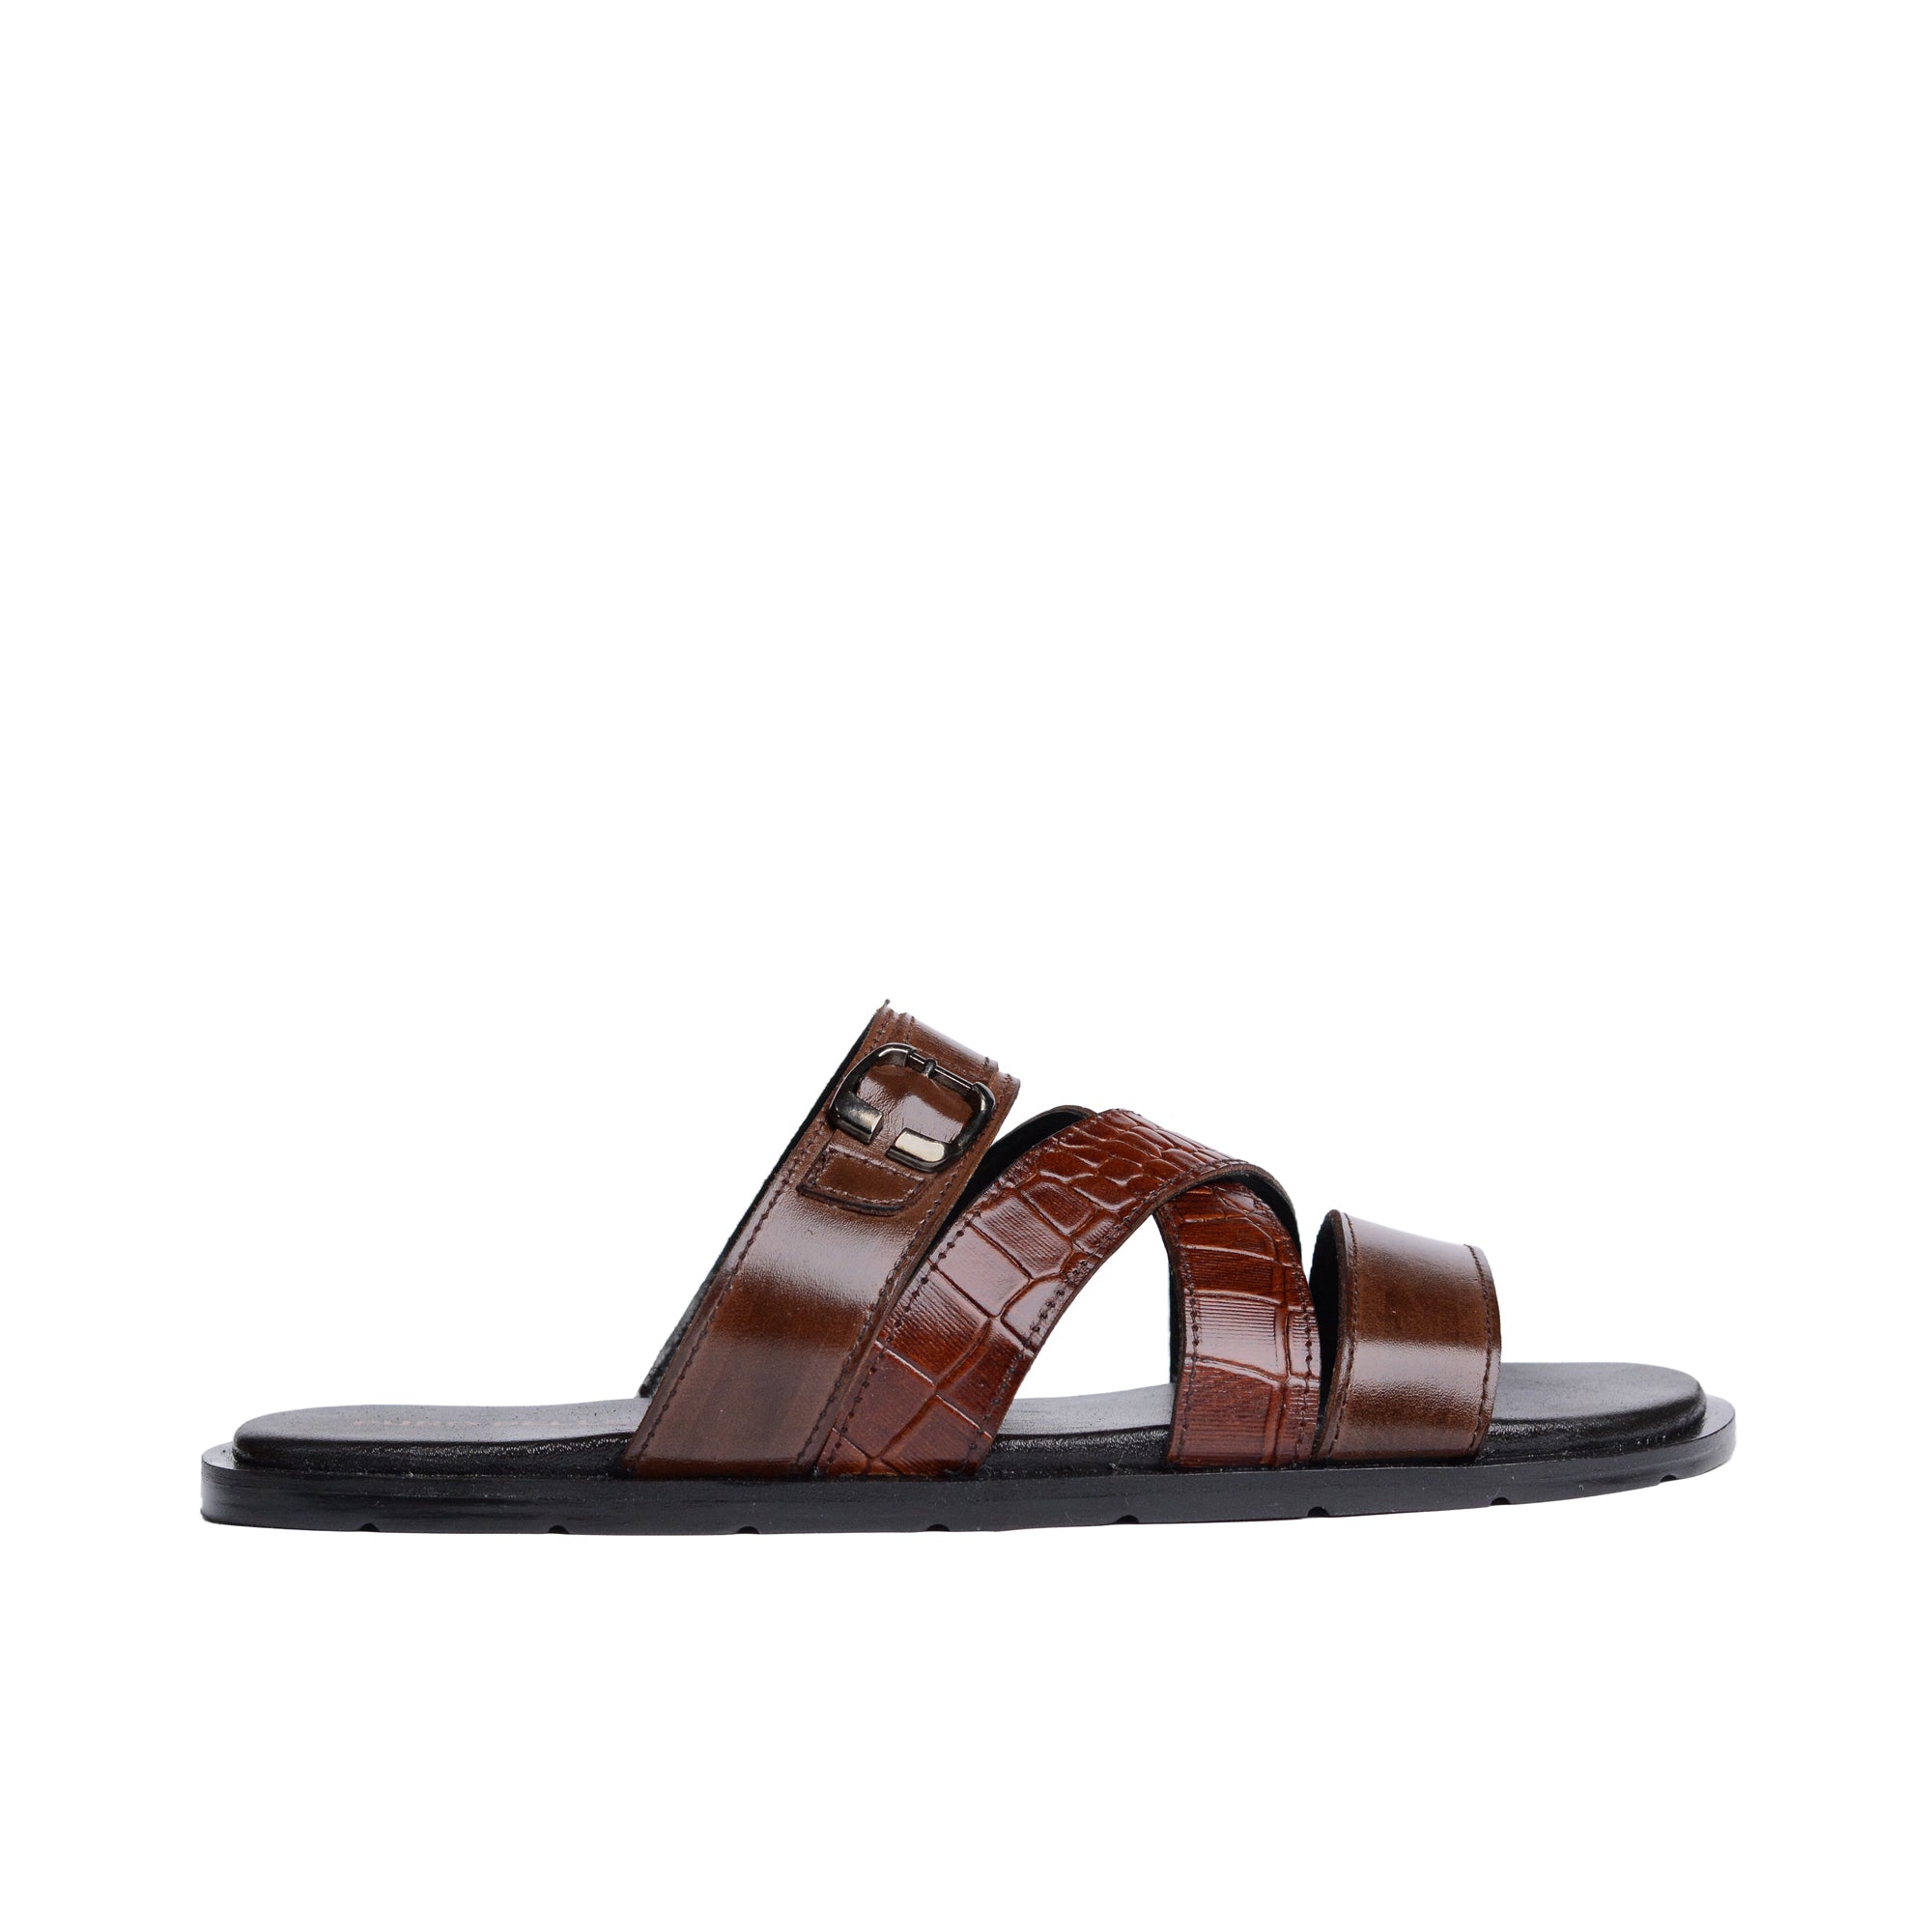 Brown Double Cross Strapped Slipper SA05